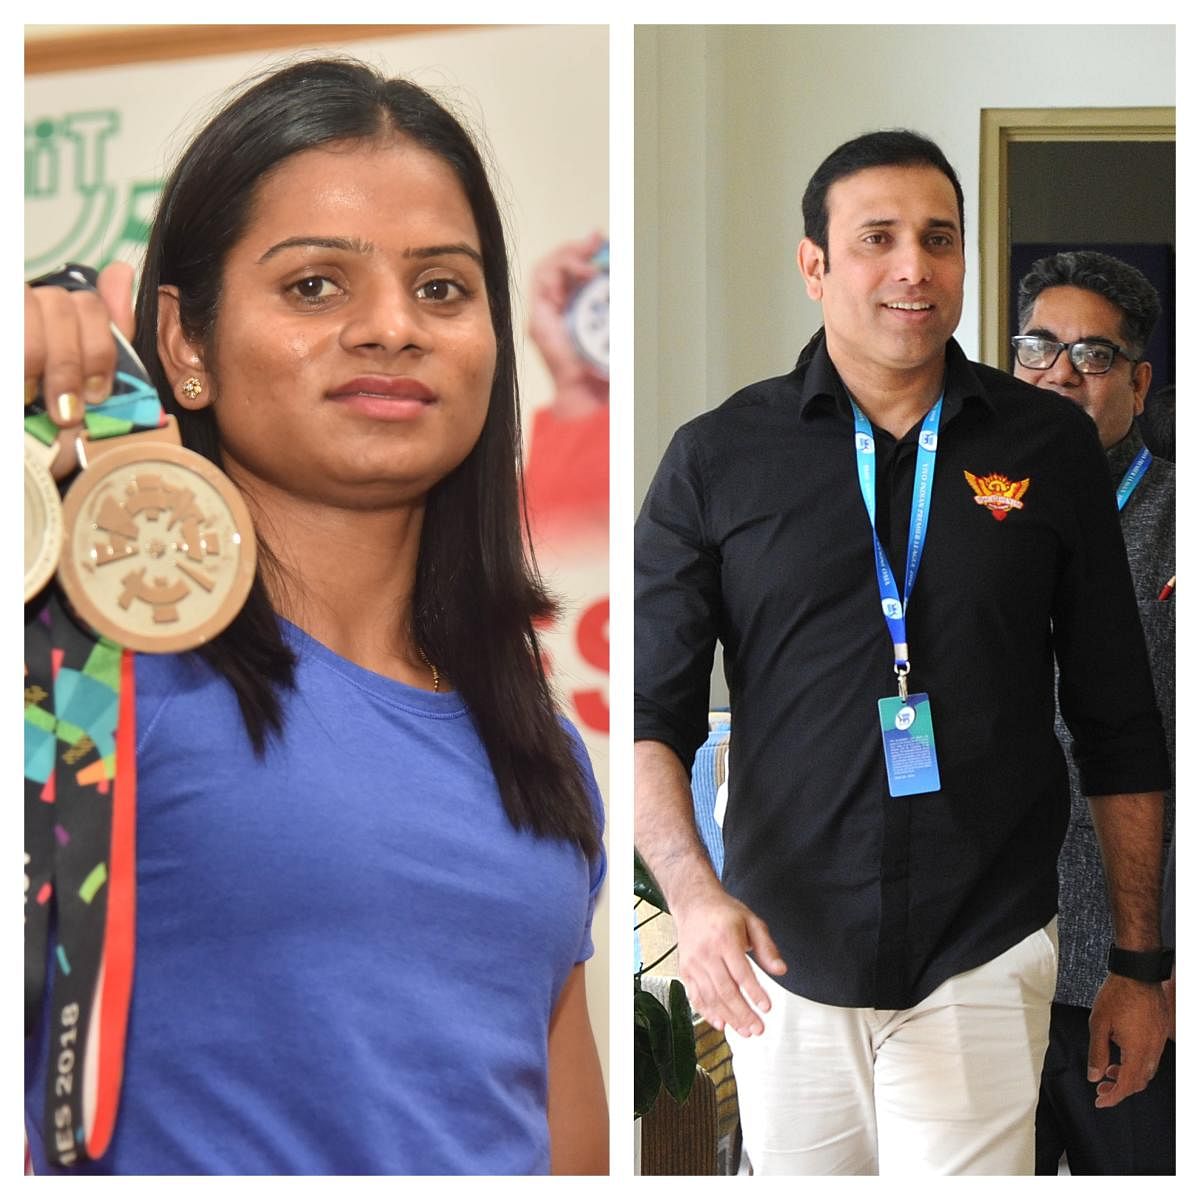 Touted to be "Asia's first and largest ever sports literary festival", the event will bring together some of the biggest names from the Indian and international sports fraternity, like sprinter Dutee Chand, former cricketer VVS Laxman among others. DH Pho